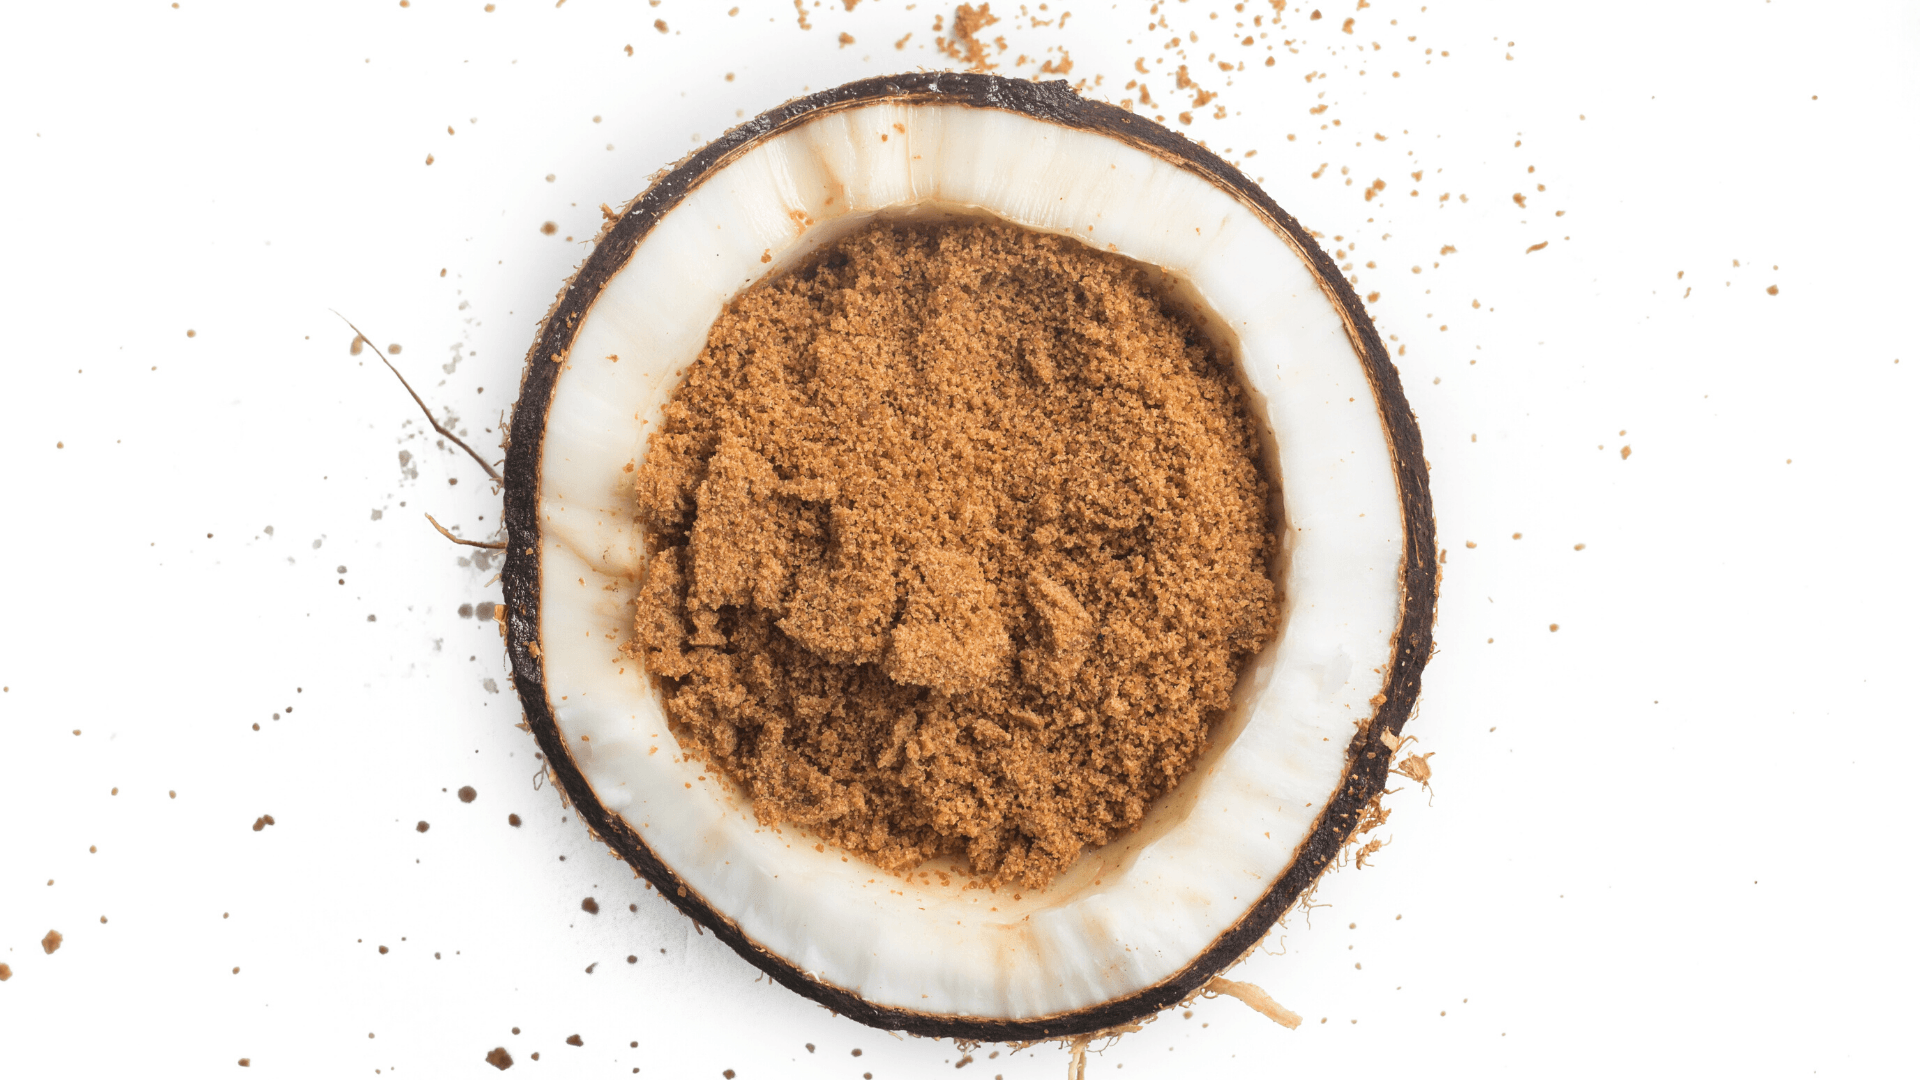 Does Coconut Sugar Live Up to the Health Hype or is it a Lie?